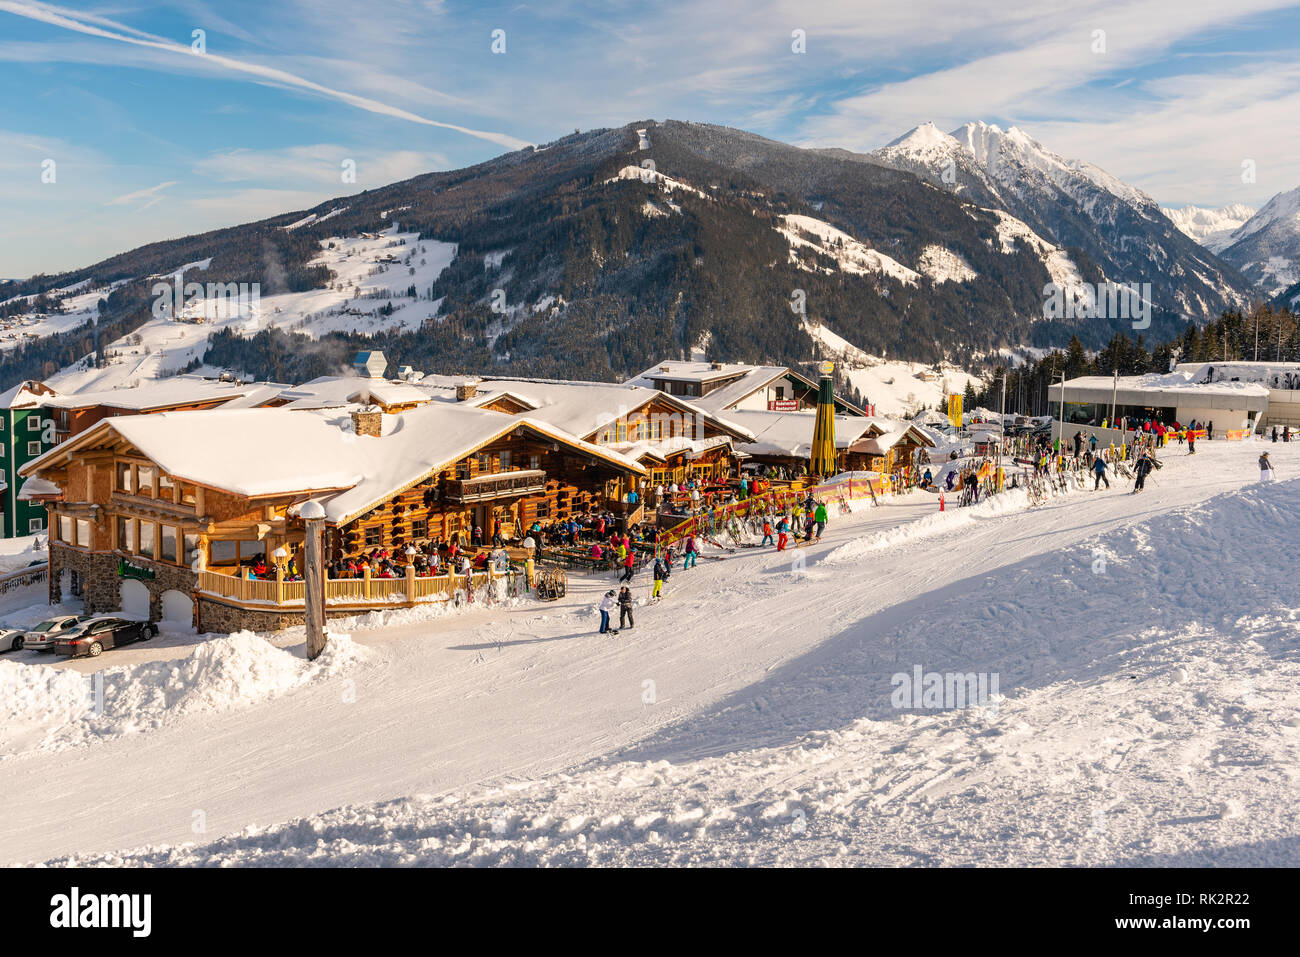 Alpine restaurant full of skiers, snowboarders and tobogganers on sunny day. In the background Hochwurzen gondola ski station, snow-capped mountains. Stock Photo